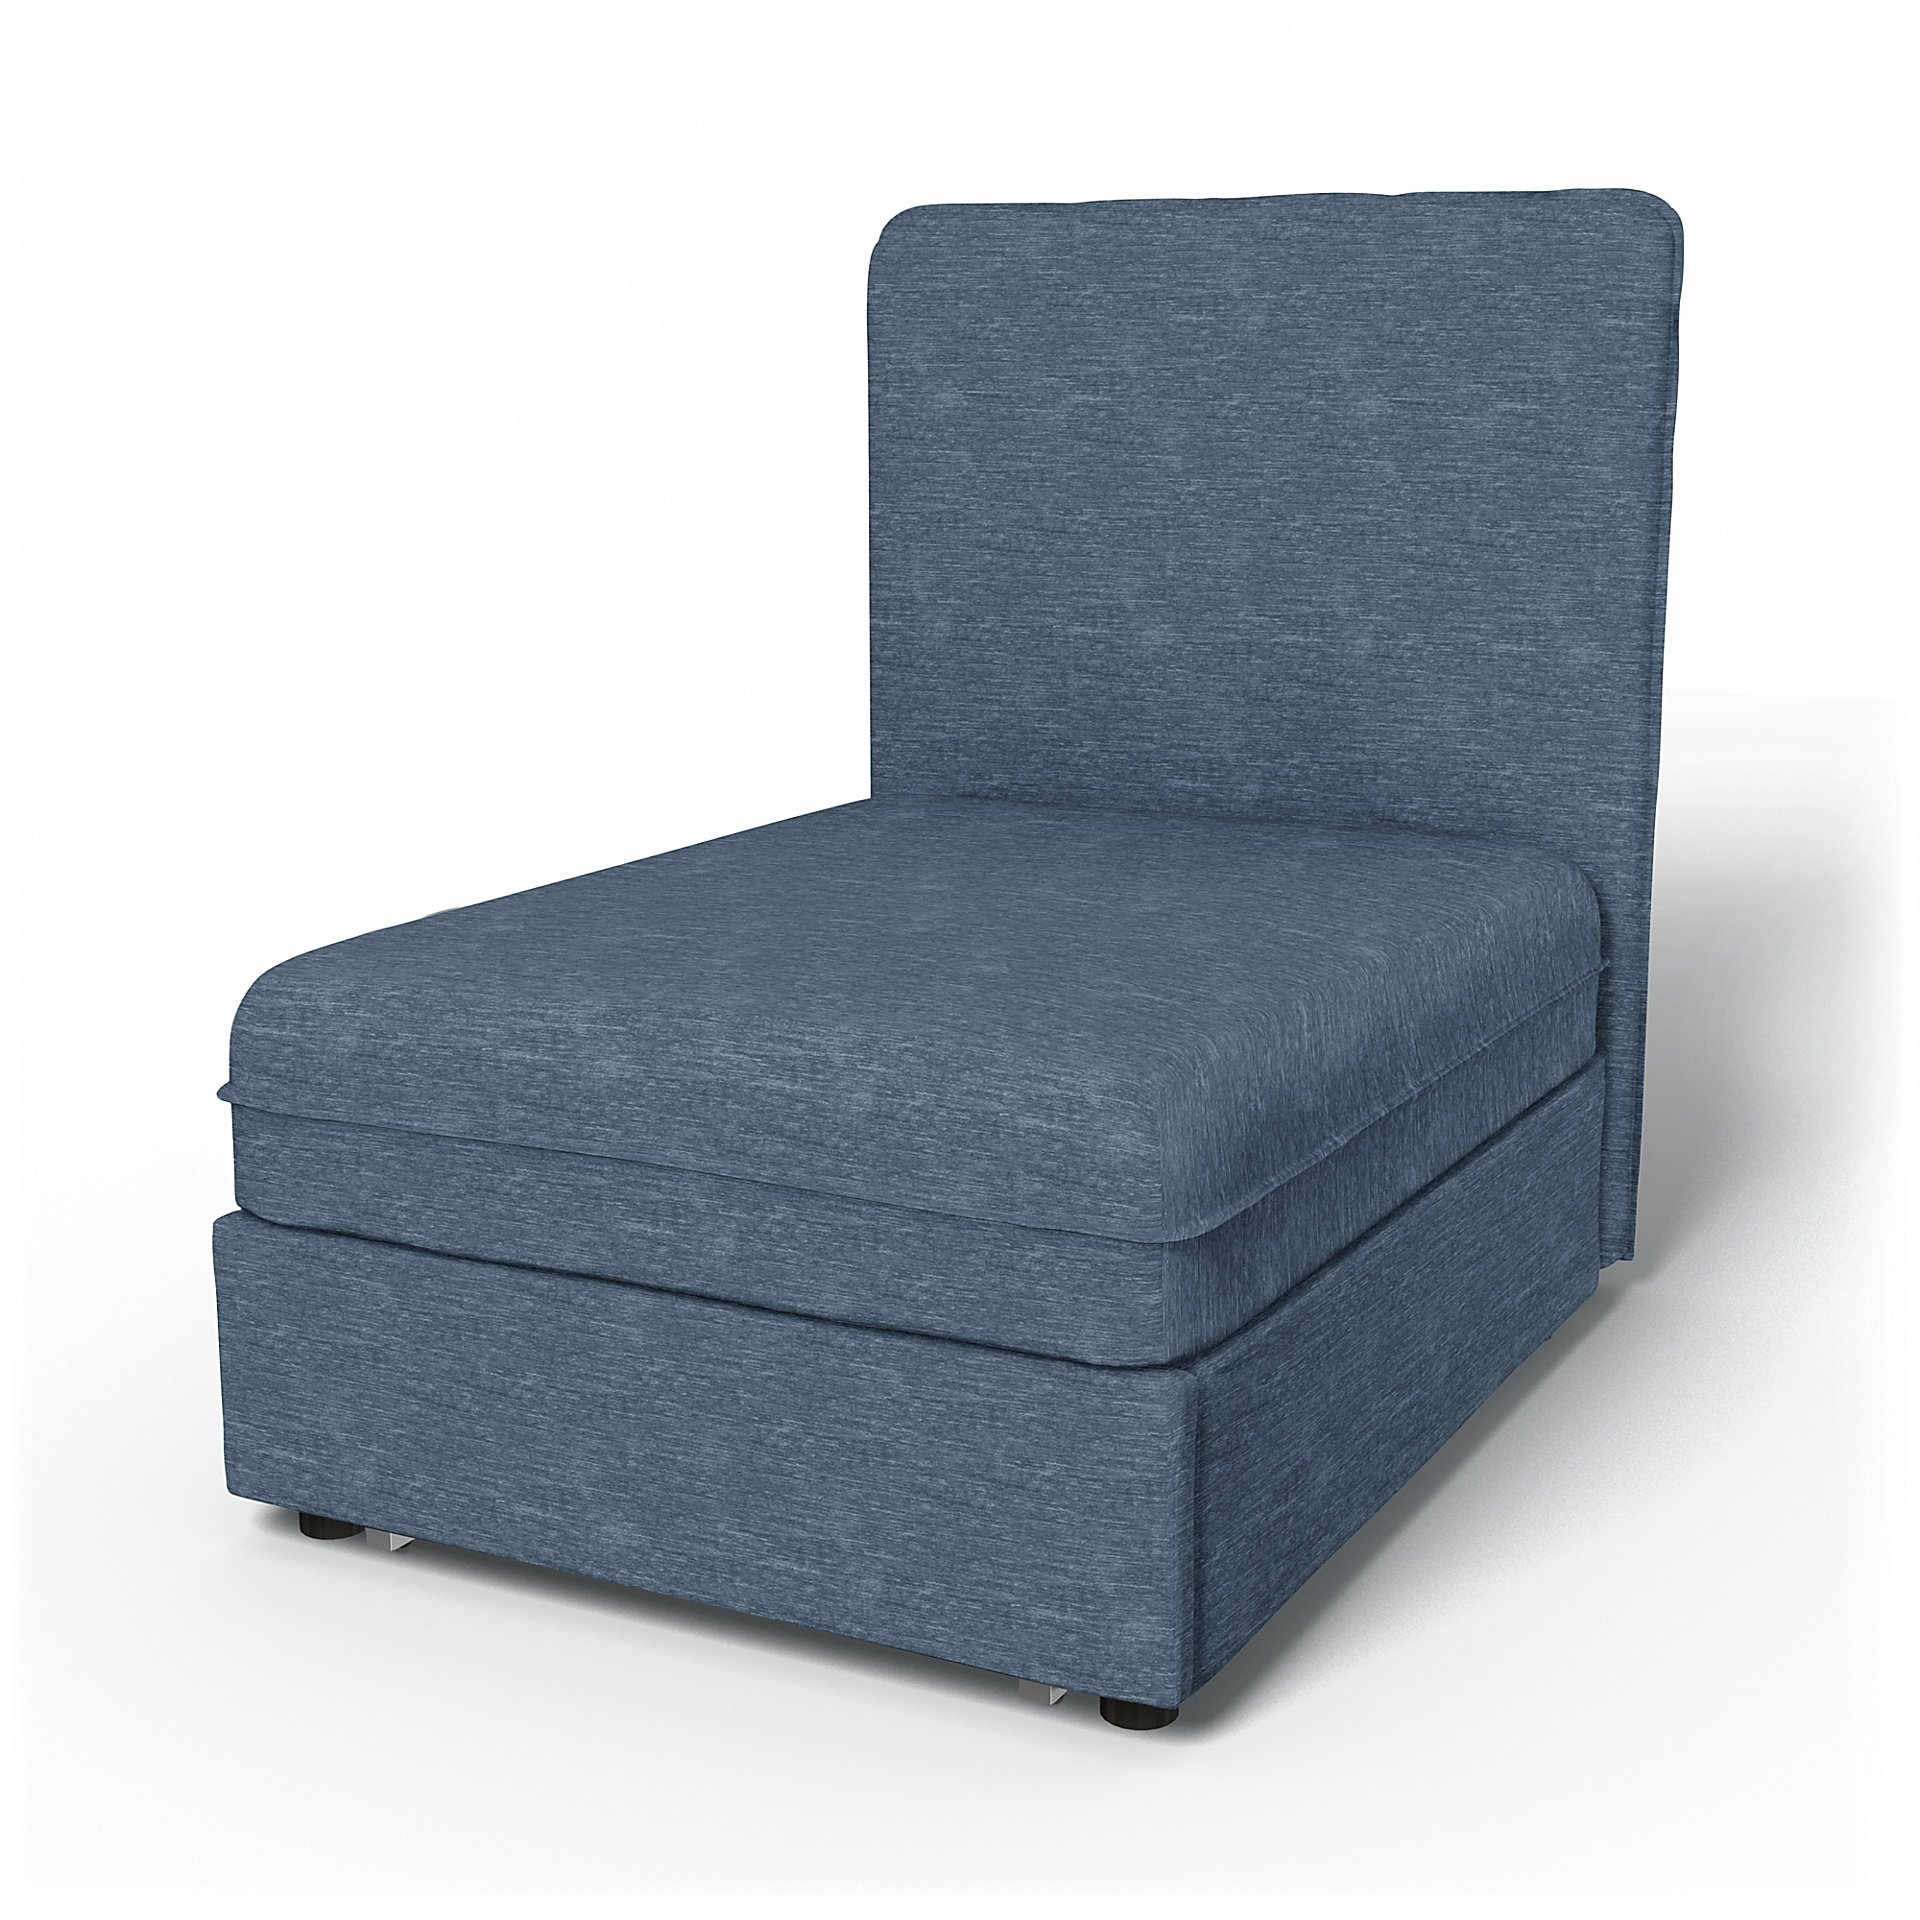 IKEA - Vallentuna Seat Module with High Back Sofa Bed Cover (80x100x46cm), Mineral Blue, Velvet - Be